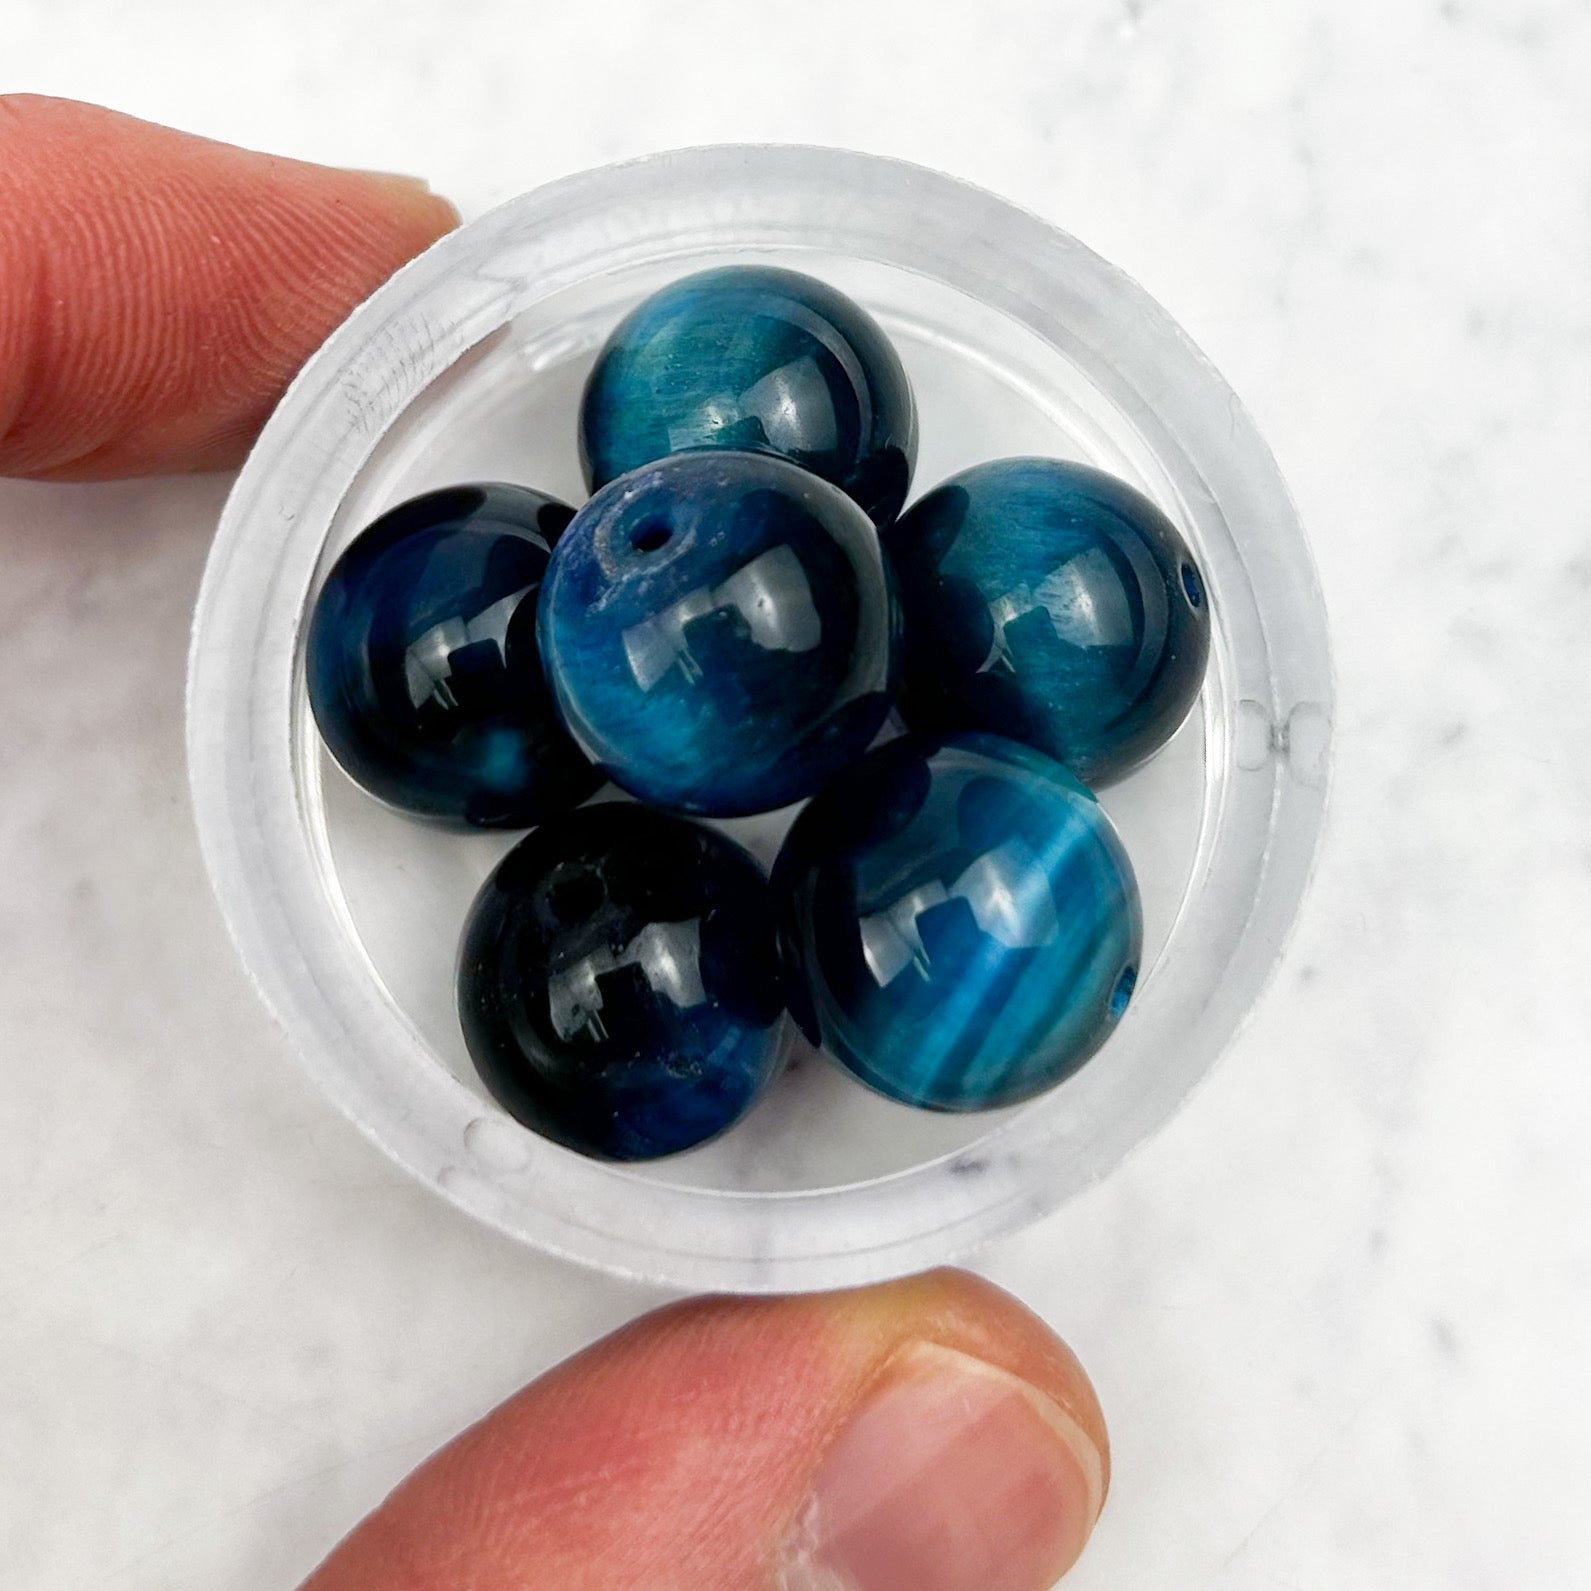 14mm Dyed Tigers Eye Blue Bead Pack (2 Beads)